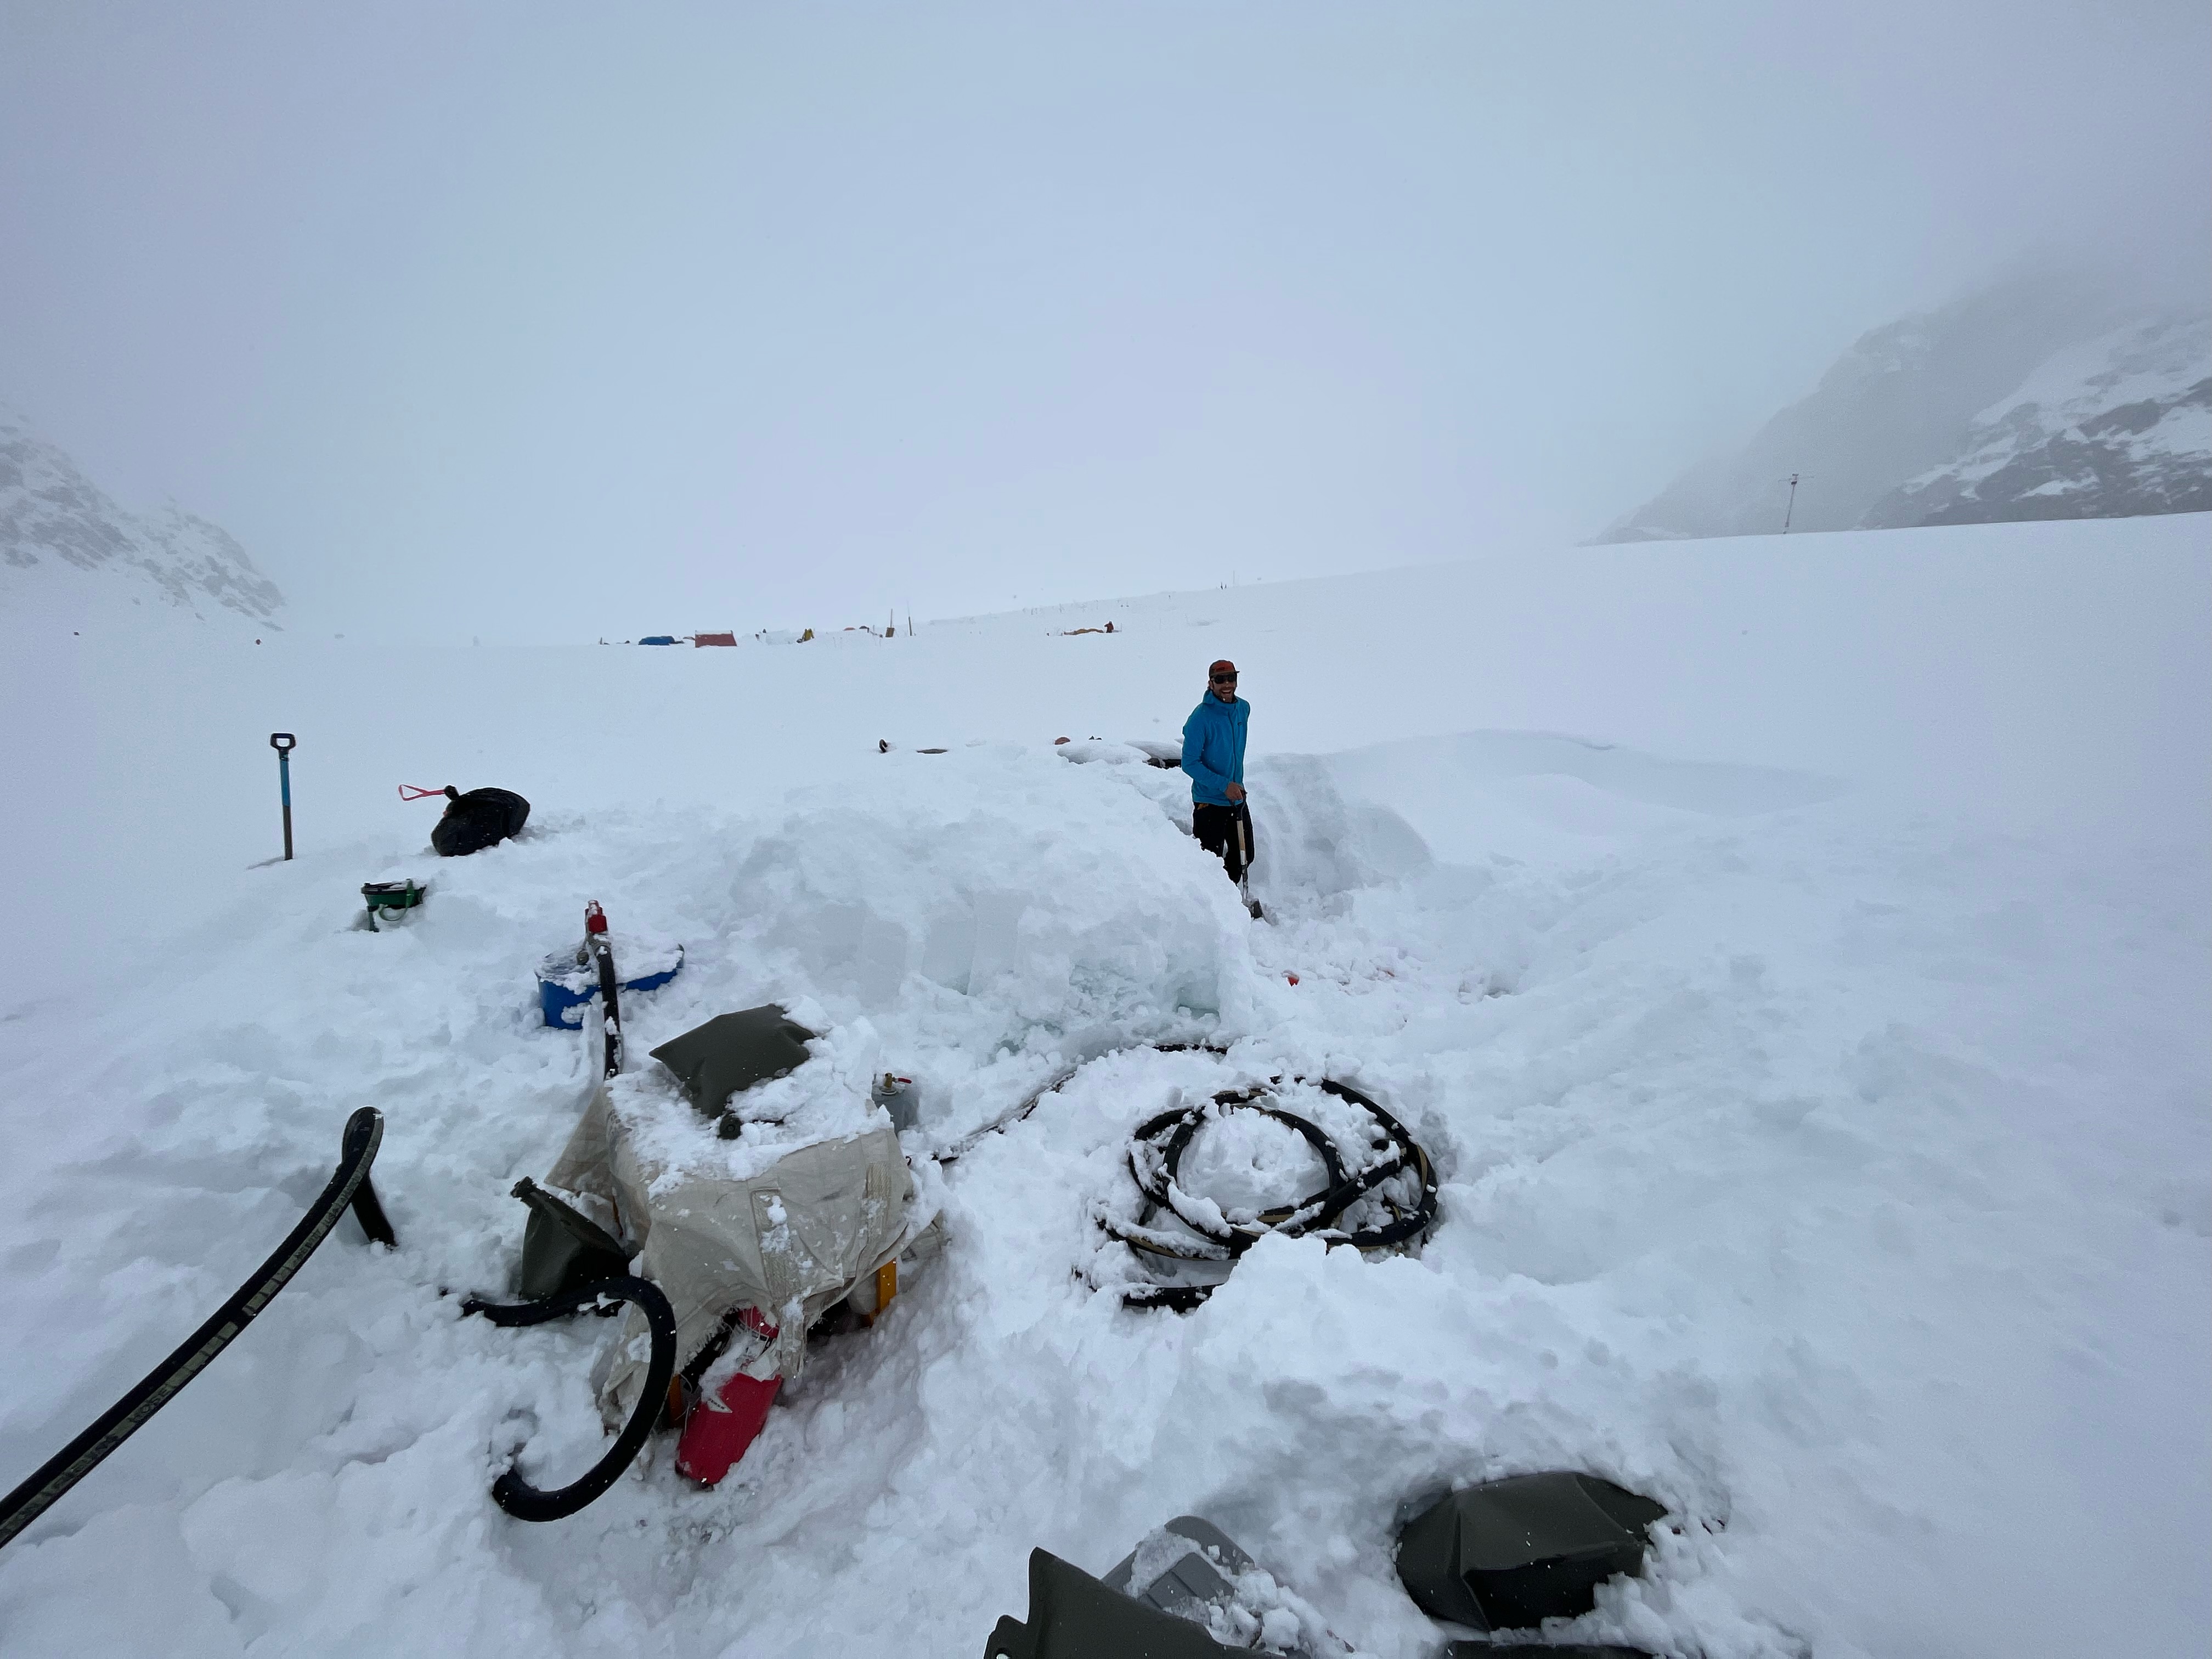 Partially snow-covered fueling equipment sits on a glacier while a man with a shovel looks on